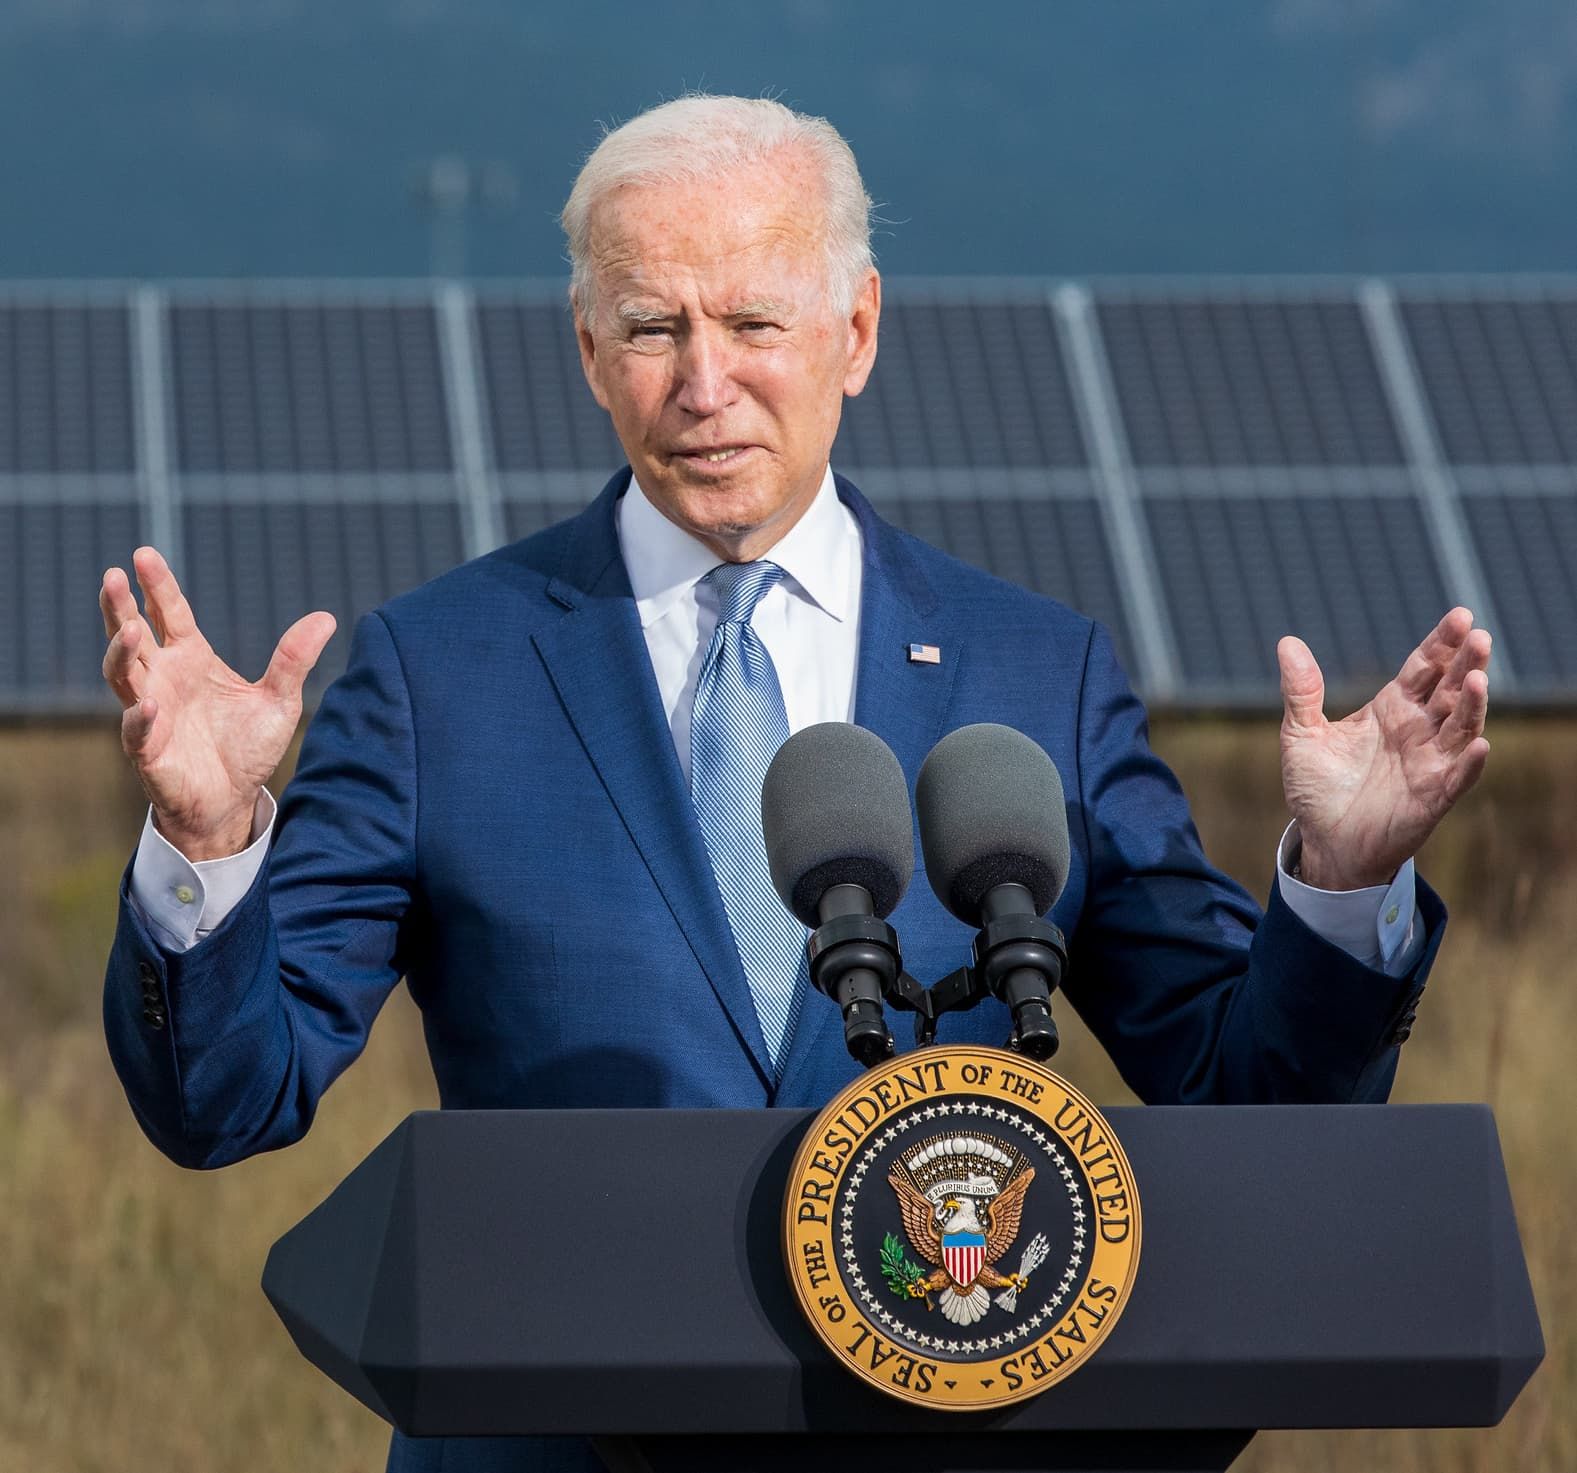 President Joe Biden speaking from behind a podium outdoors. Behind him is an array of solar panels.